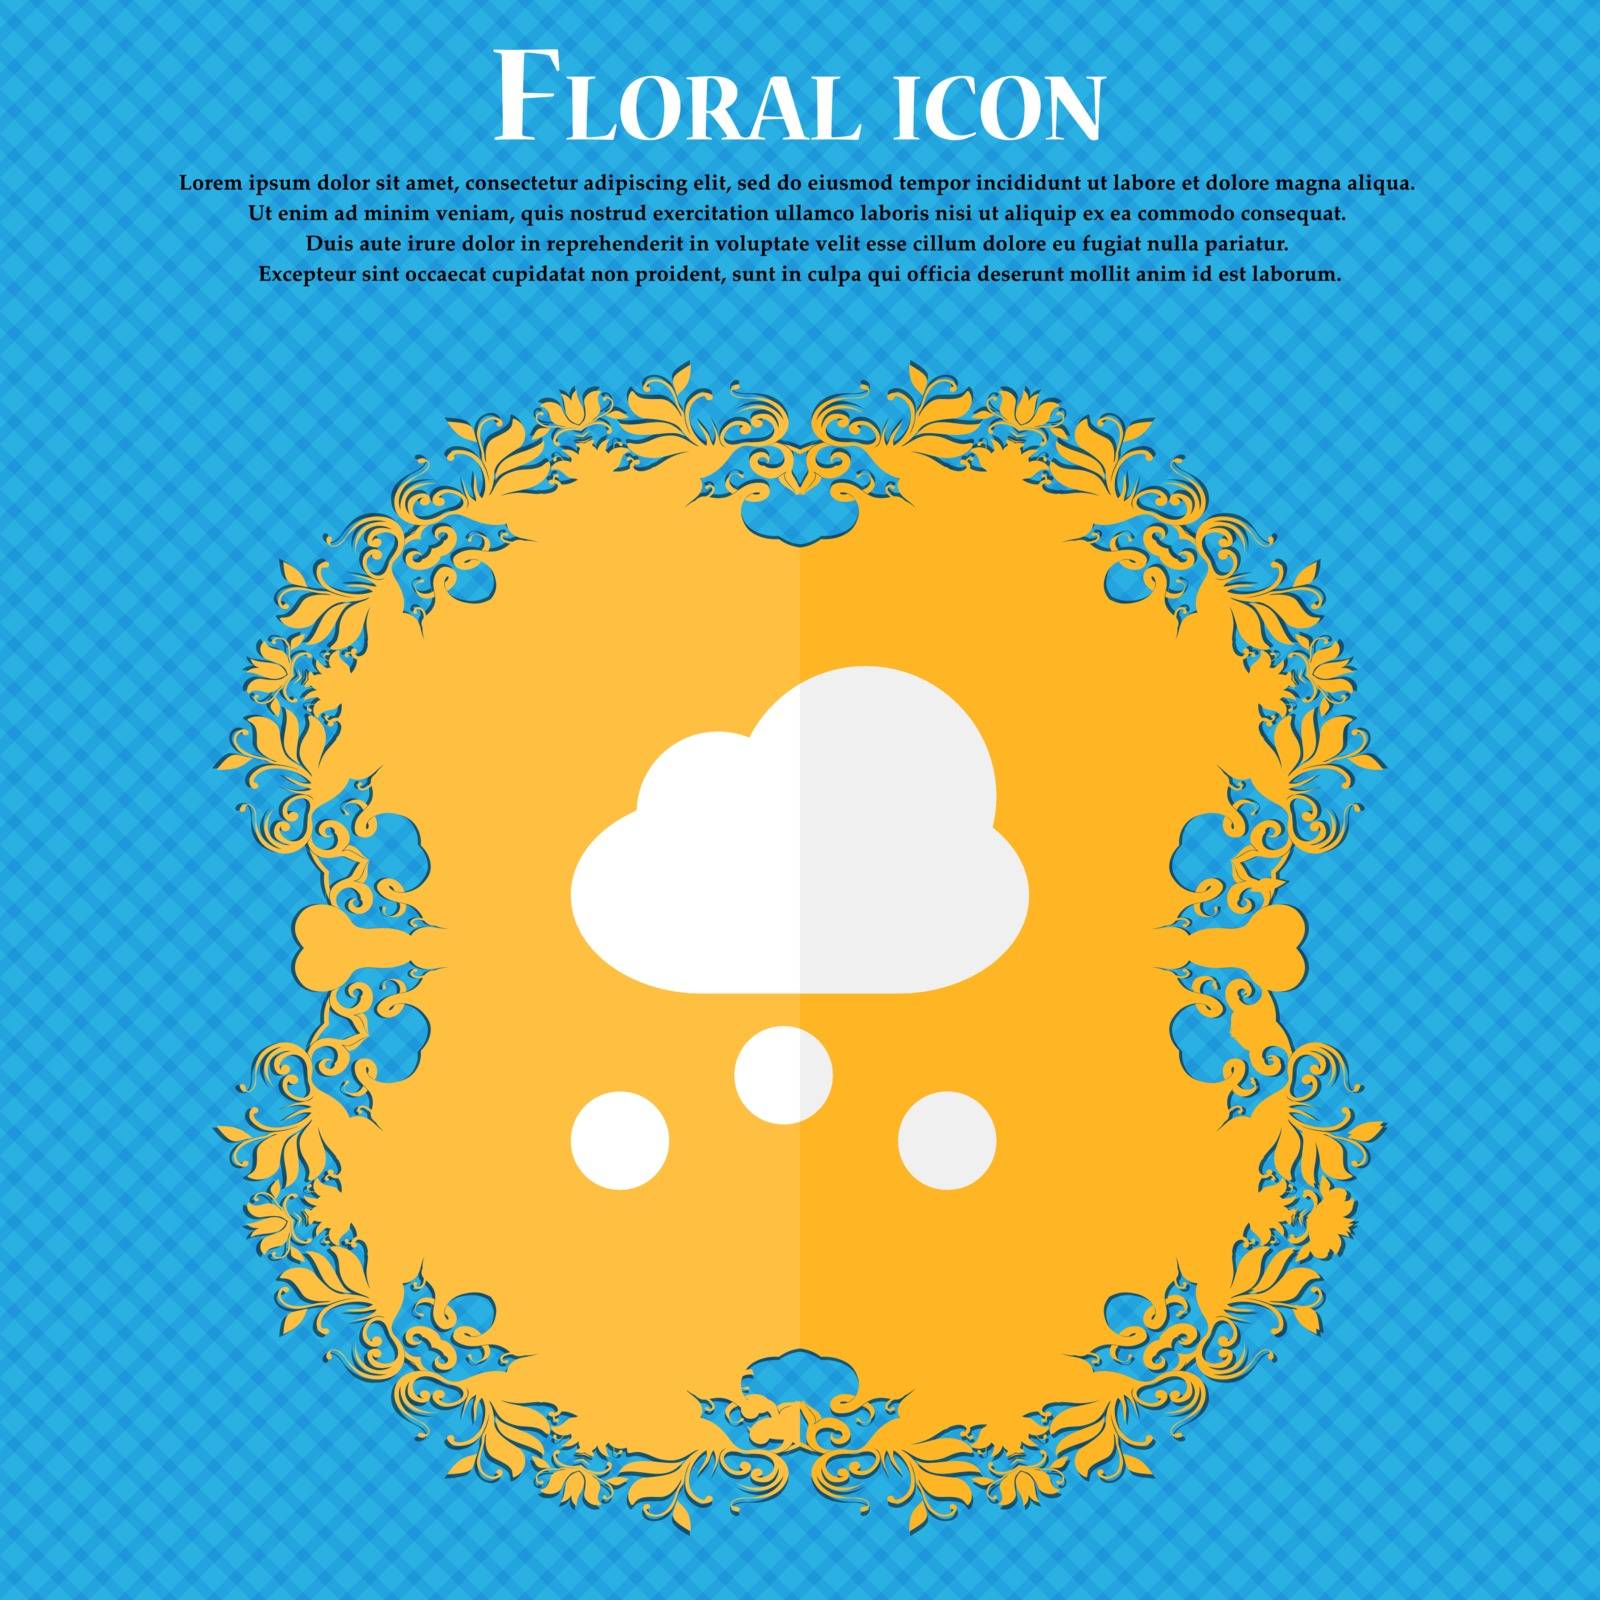 snowing . Floral flat design on a blue abstract background with place for your text. Vector illustration